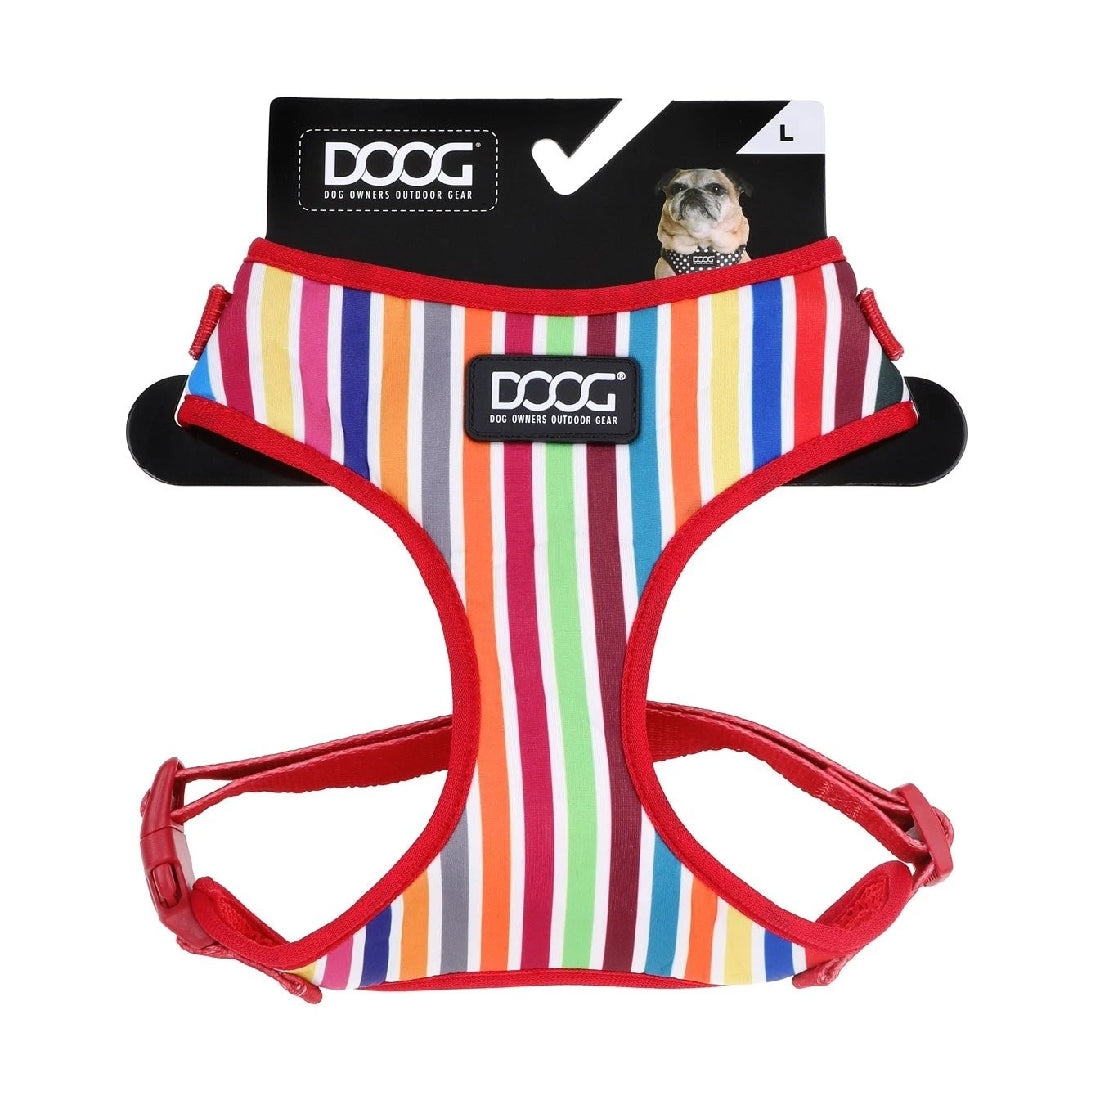 Harness Dog Doog Neoflex Scooby-Ascot Saddlery-The Equestrian